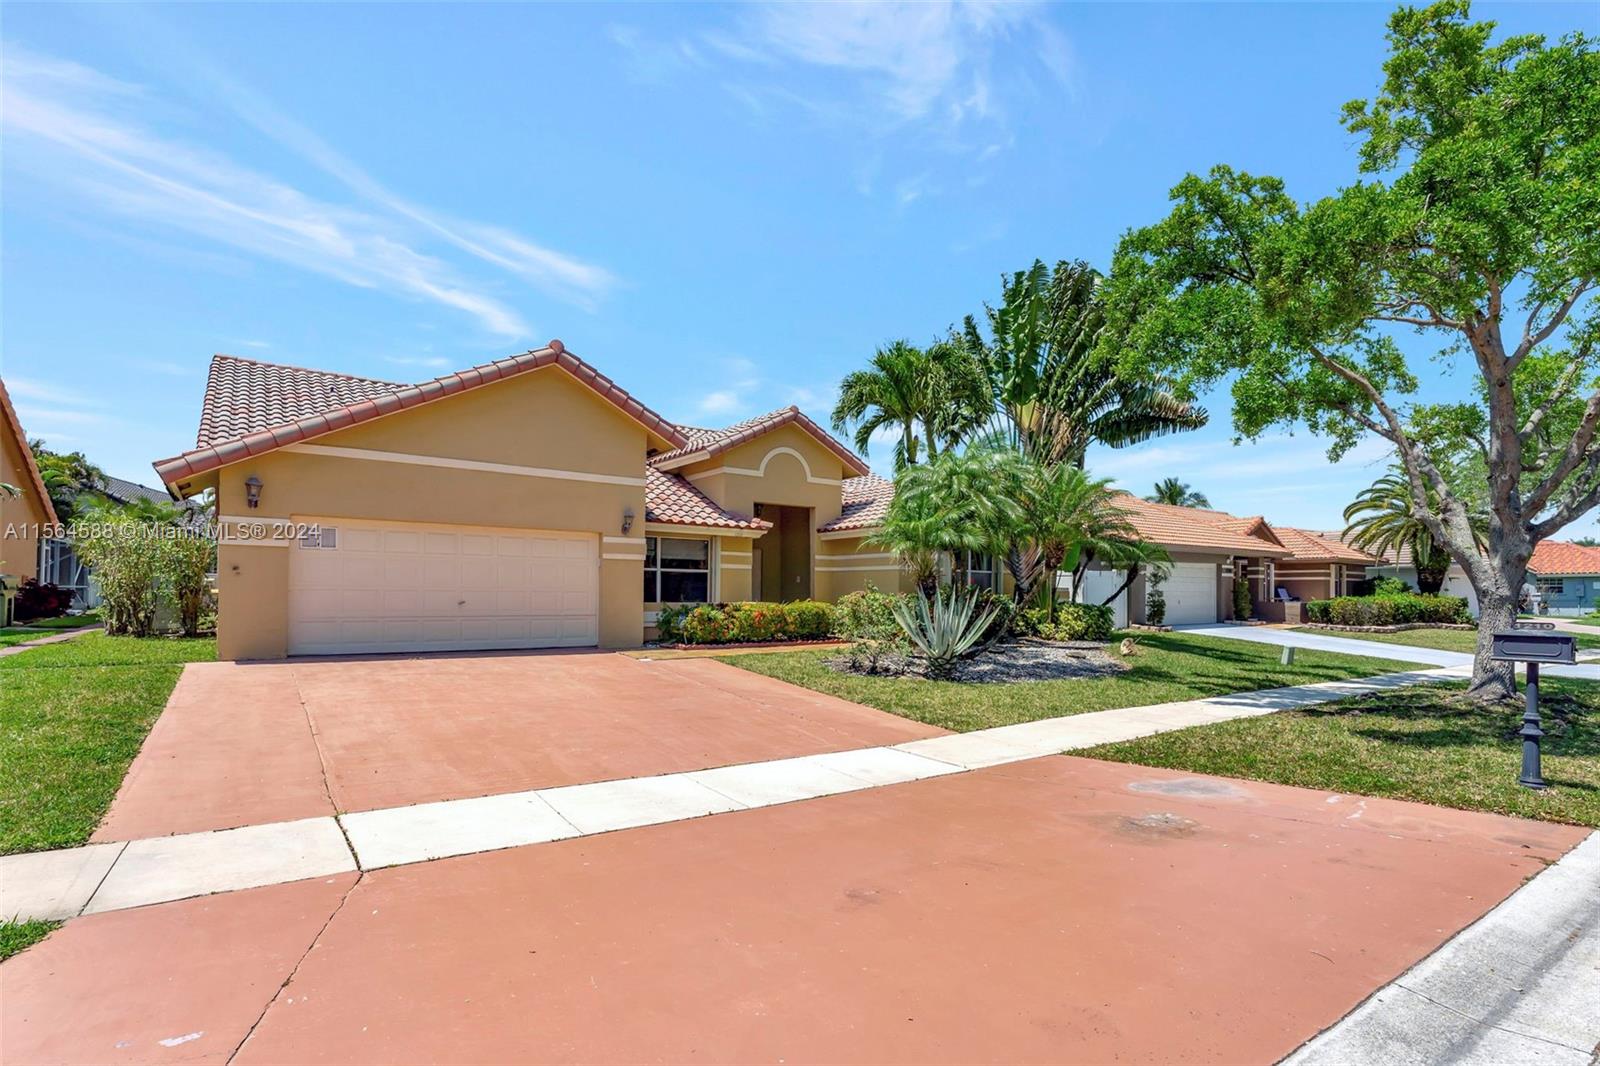 1210 NW 161st Ave, Pembroke Pines, Florida 33028, 4 Bedrooms Bedrooms, ,2 BathroomsBathrooms,Residential,For Sale,1210 NW 161st Ave,A11564588